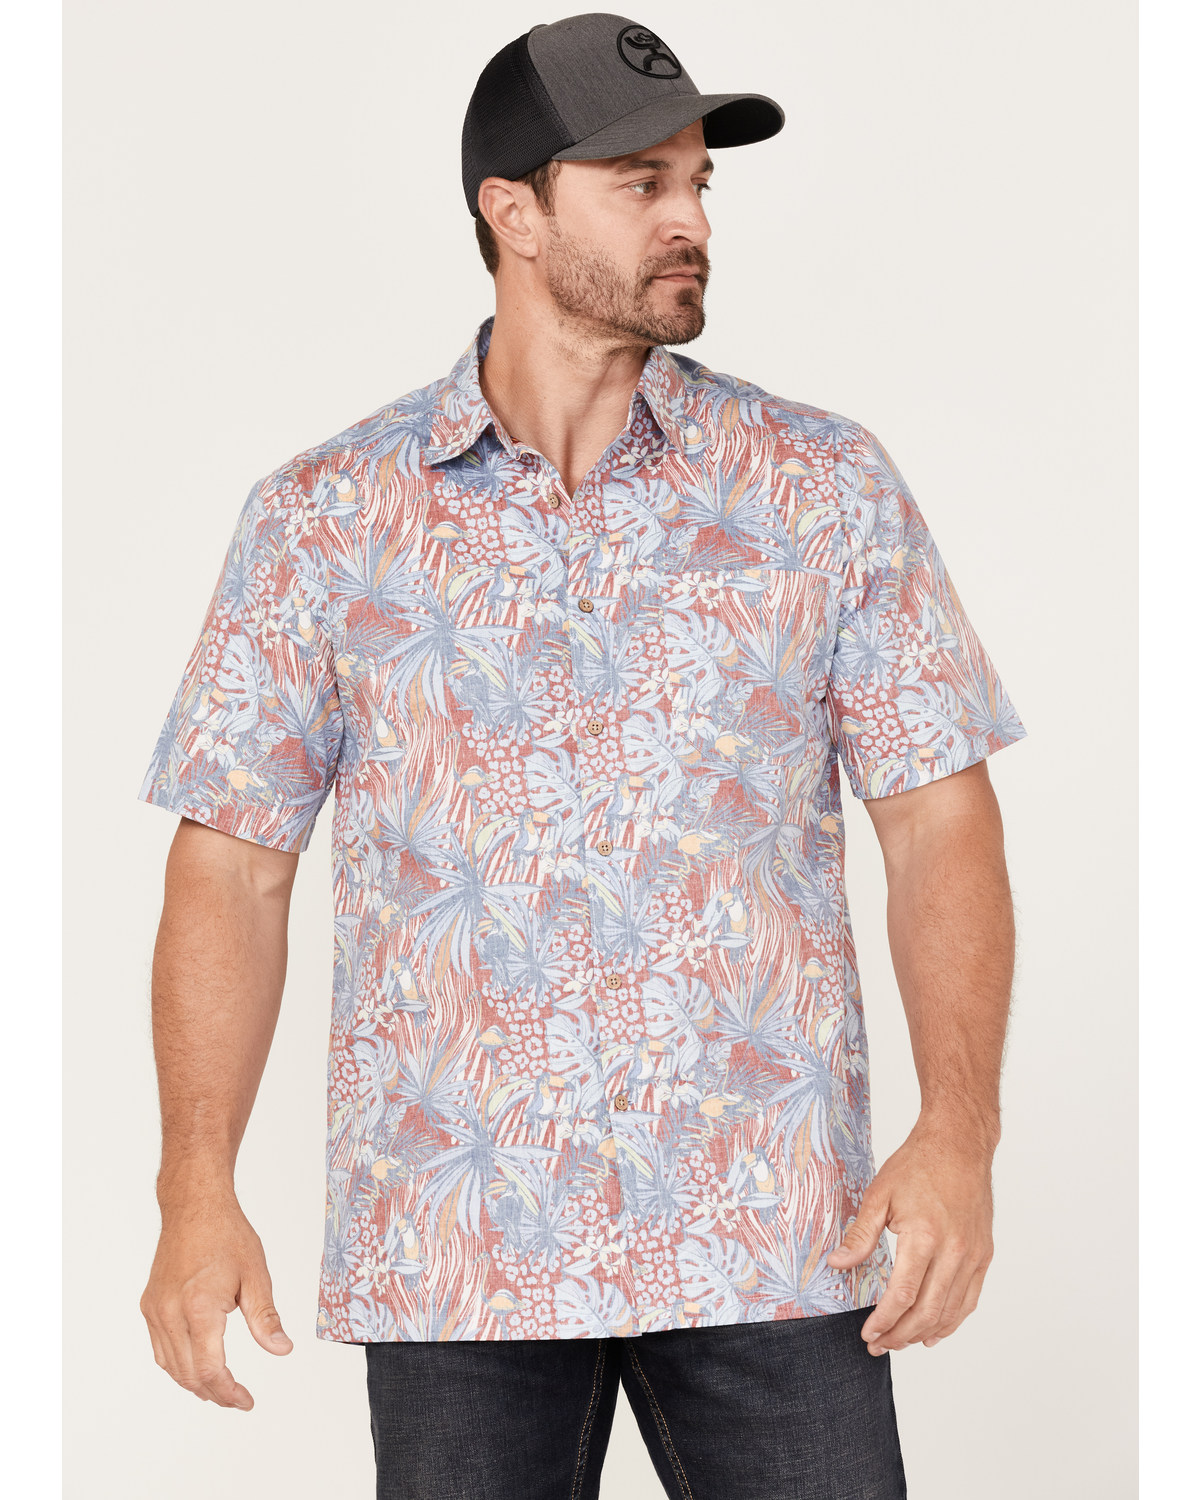 Scully Men's Birds Of Paradise Floral Print Short Sleeve Button Down Western Shirt